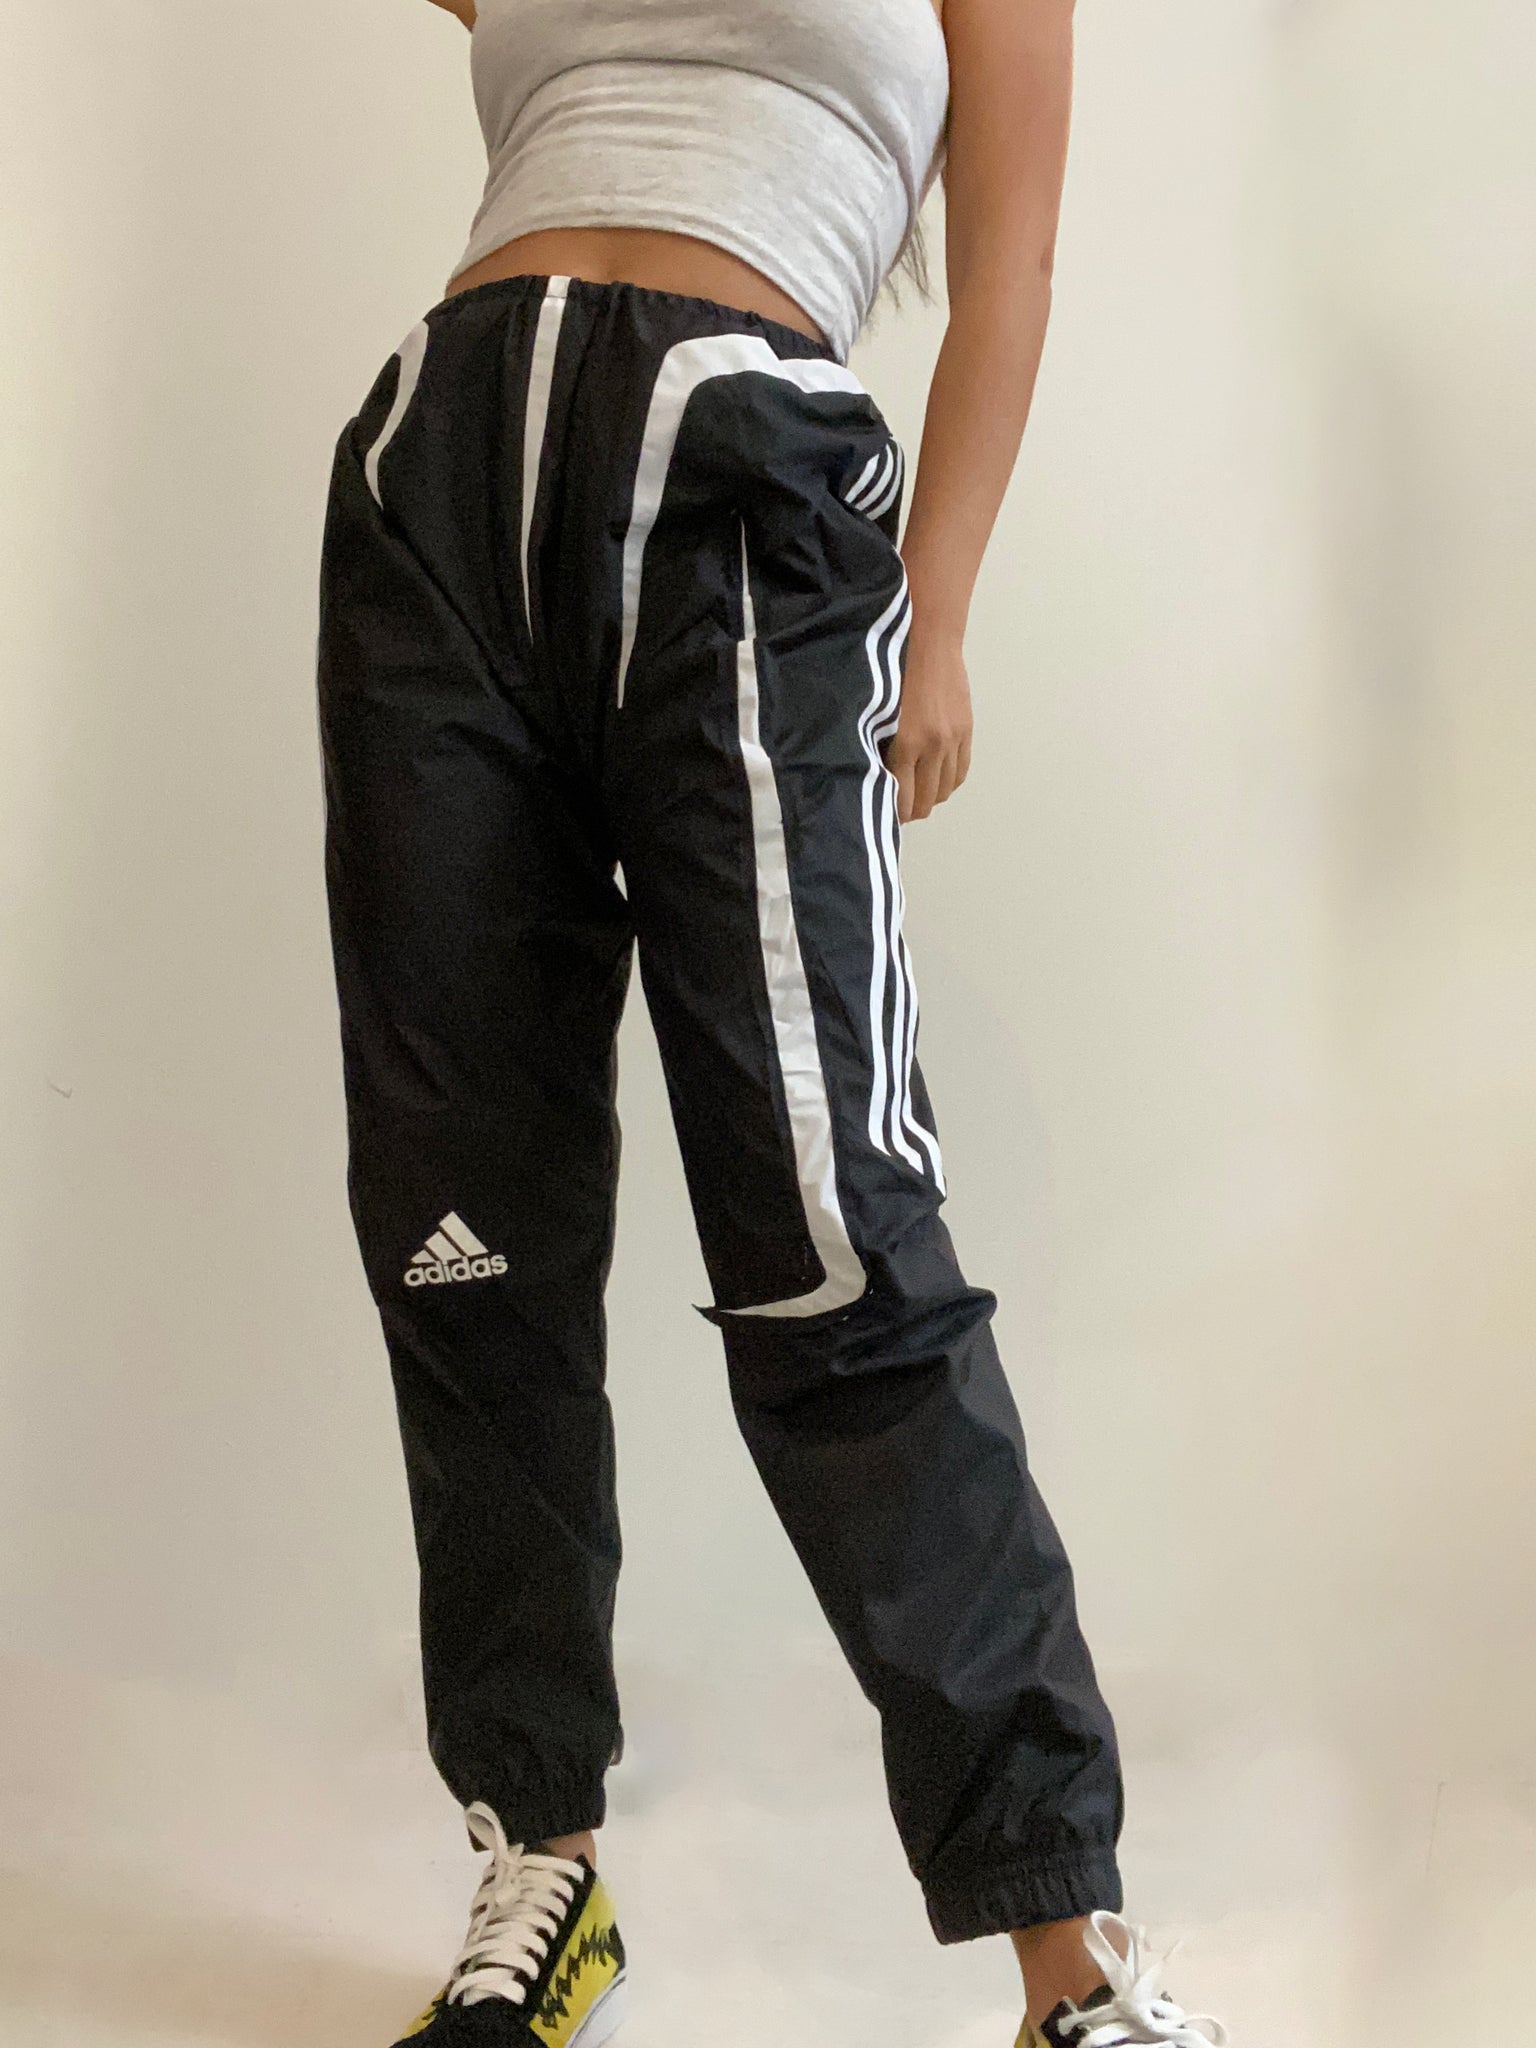 Vintage Adidas Wind Pants  Sporty outfits, Vintage outfits